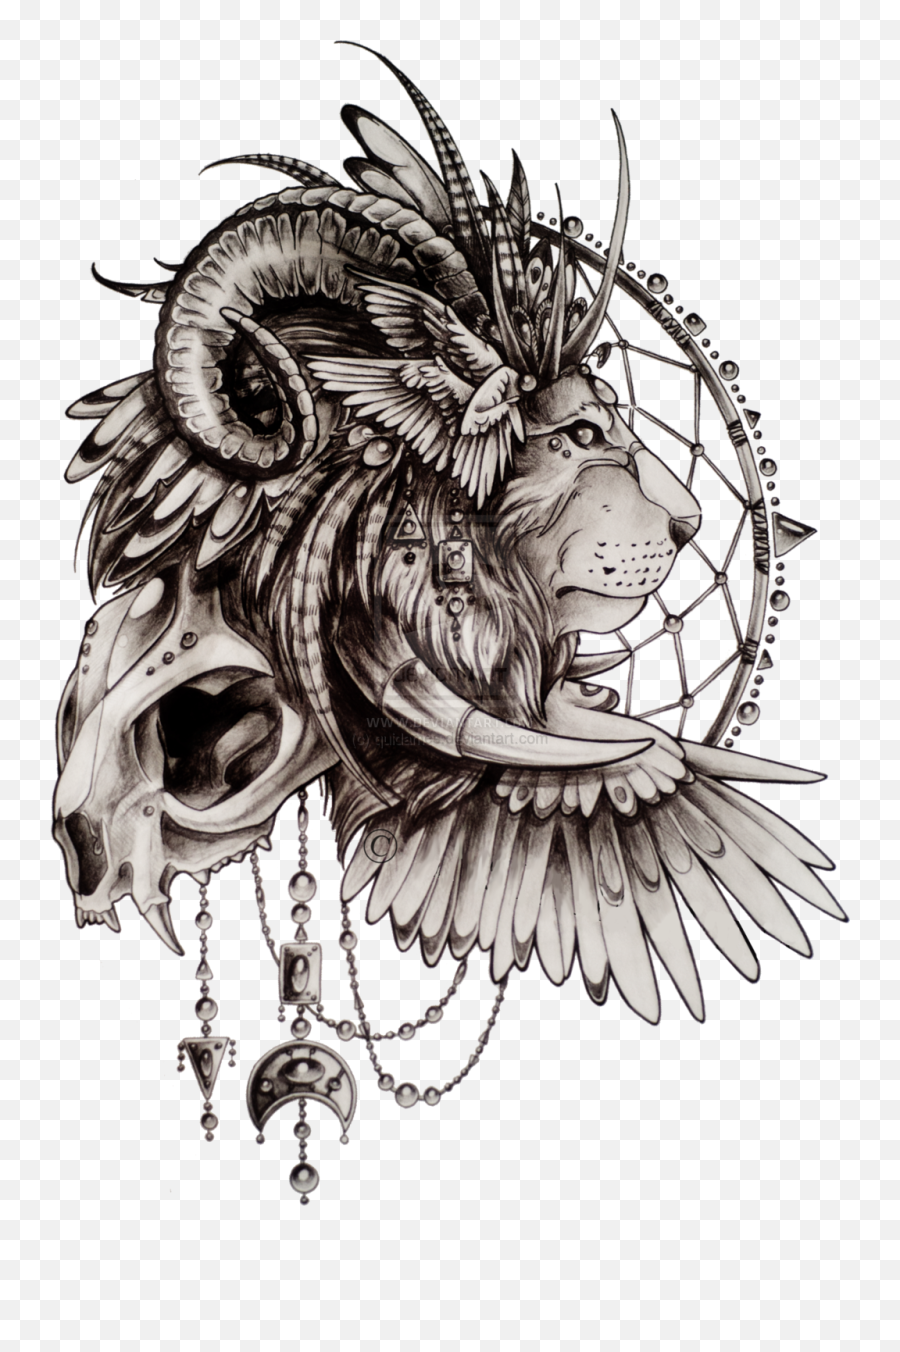 Lion Tattoo Png Transparent Free Images Only - Dream Catcher Lion Tattoo,Skull Tattoo Png